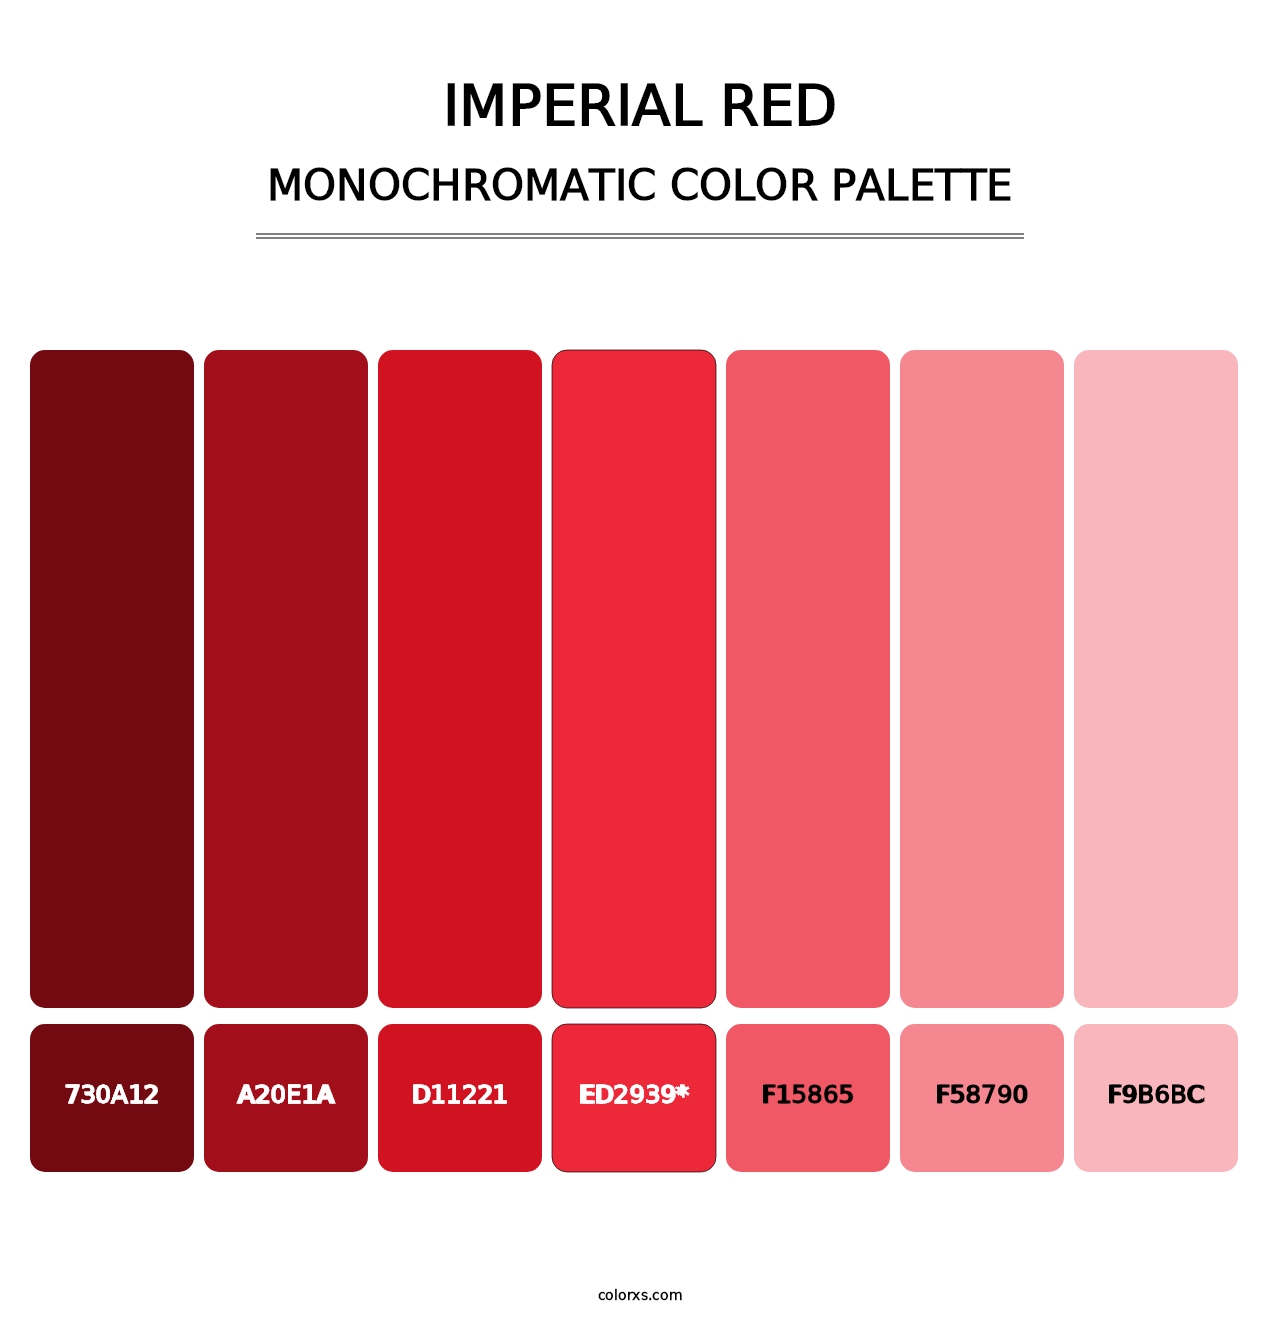 Imperial Red - Monochromatic Color Palette